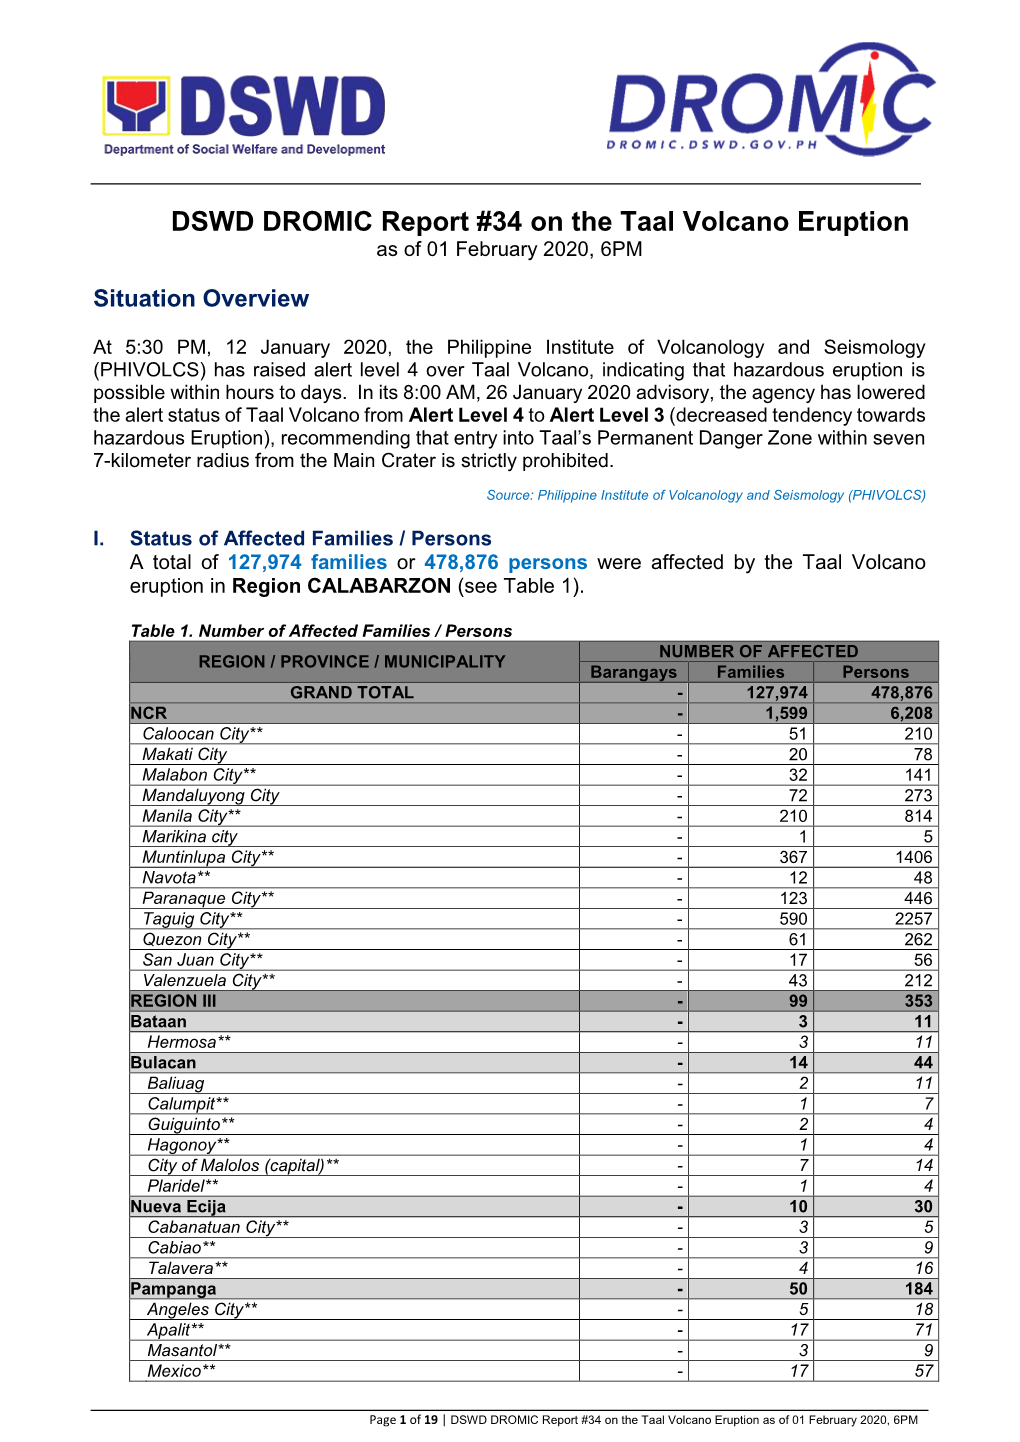 DSWD DROMIC Report #34 on the Taal Volcano Eruption As of 01 February 2020, 6PM